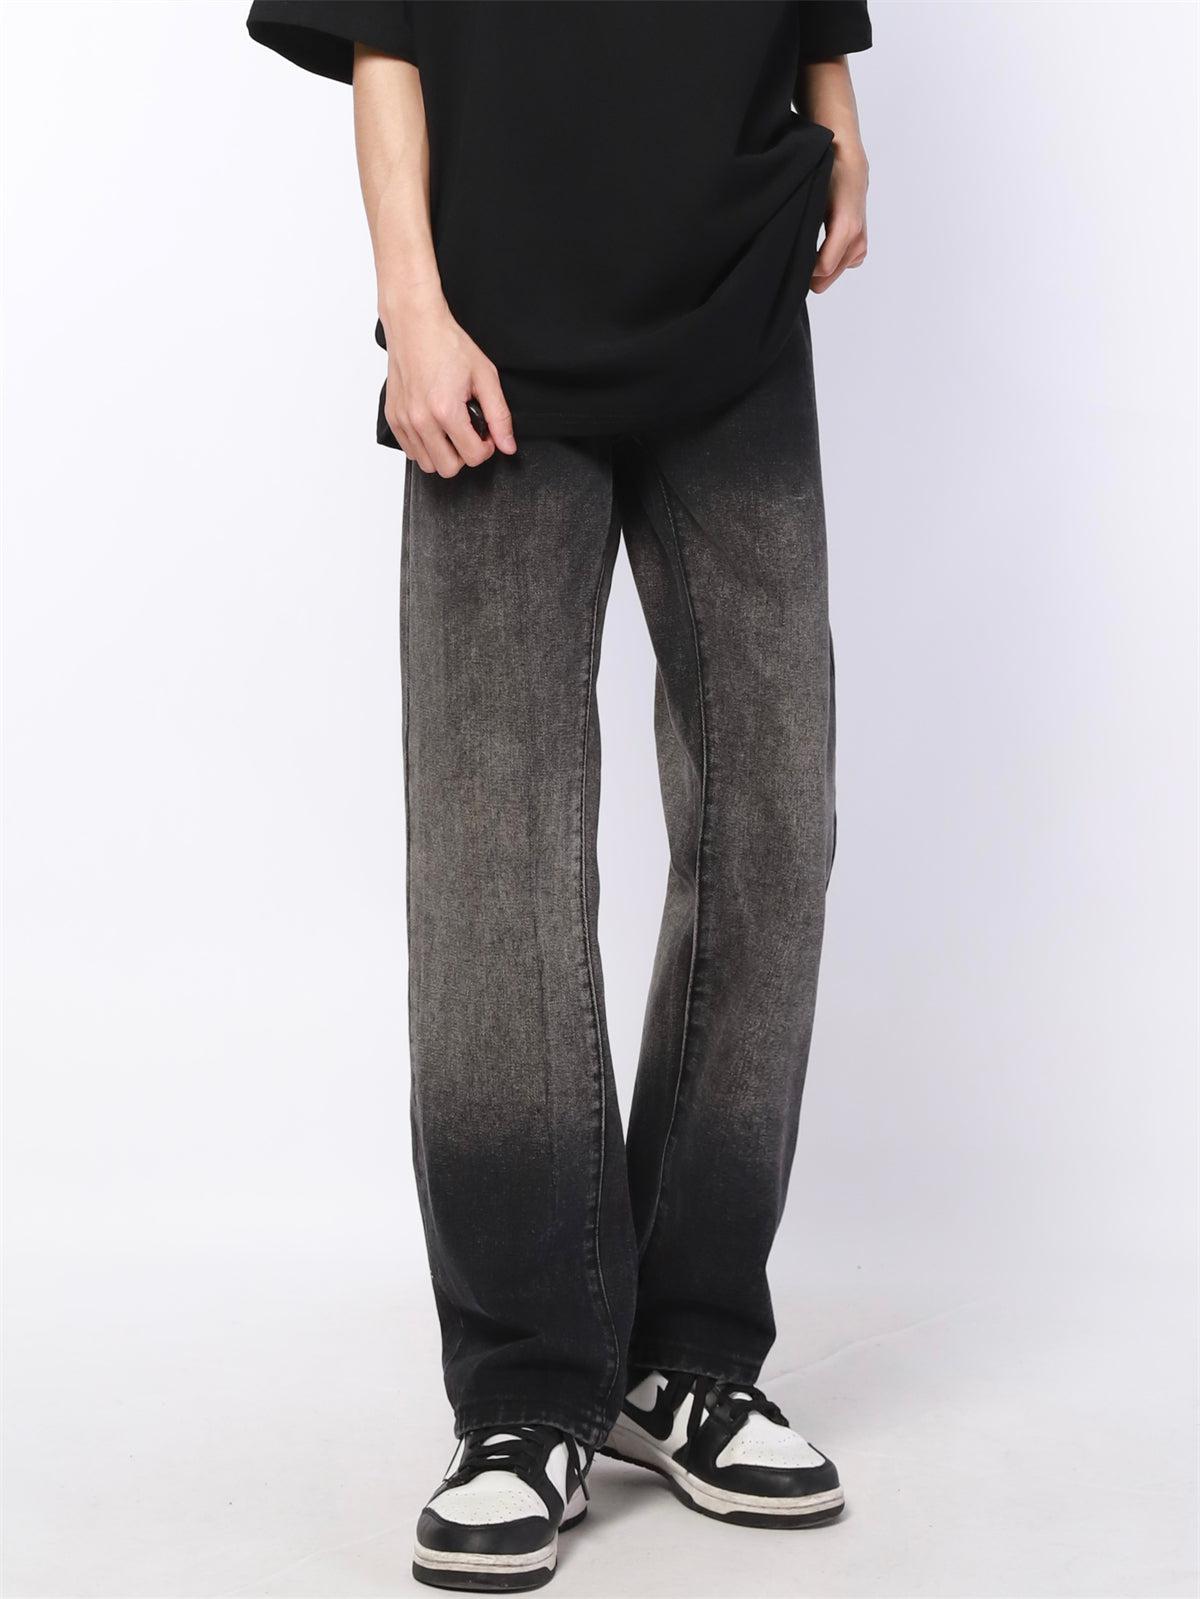 Gradient Washed Straight Leg Jeans Korean Street Fashion Jeans By Made Extreme Shop Online at OH Vault